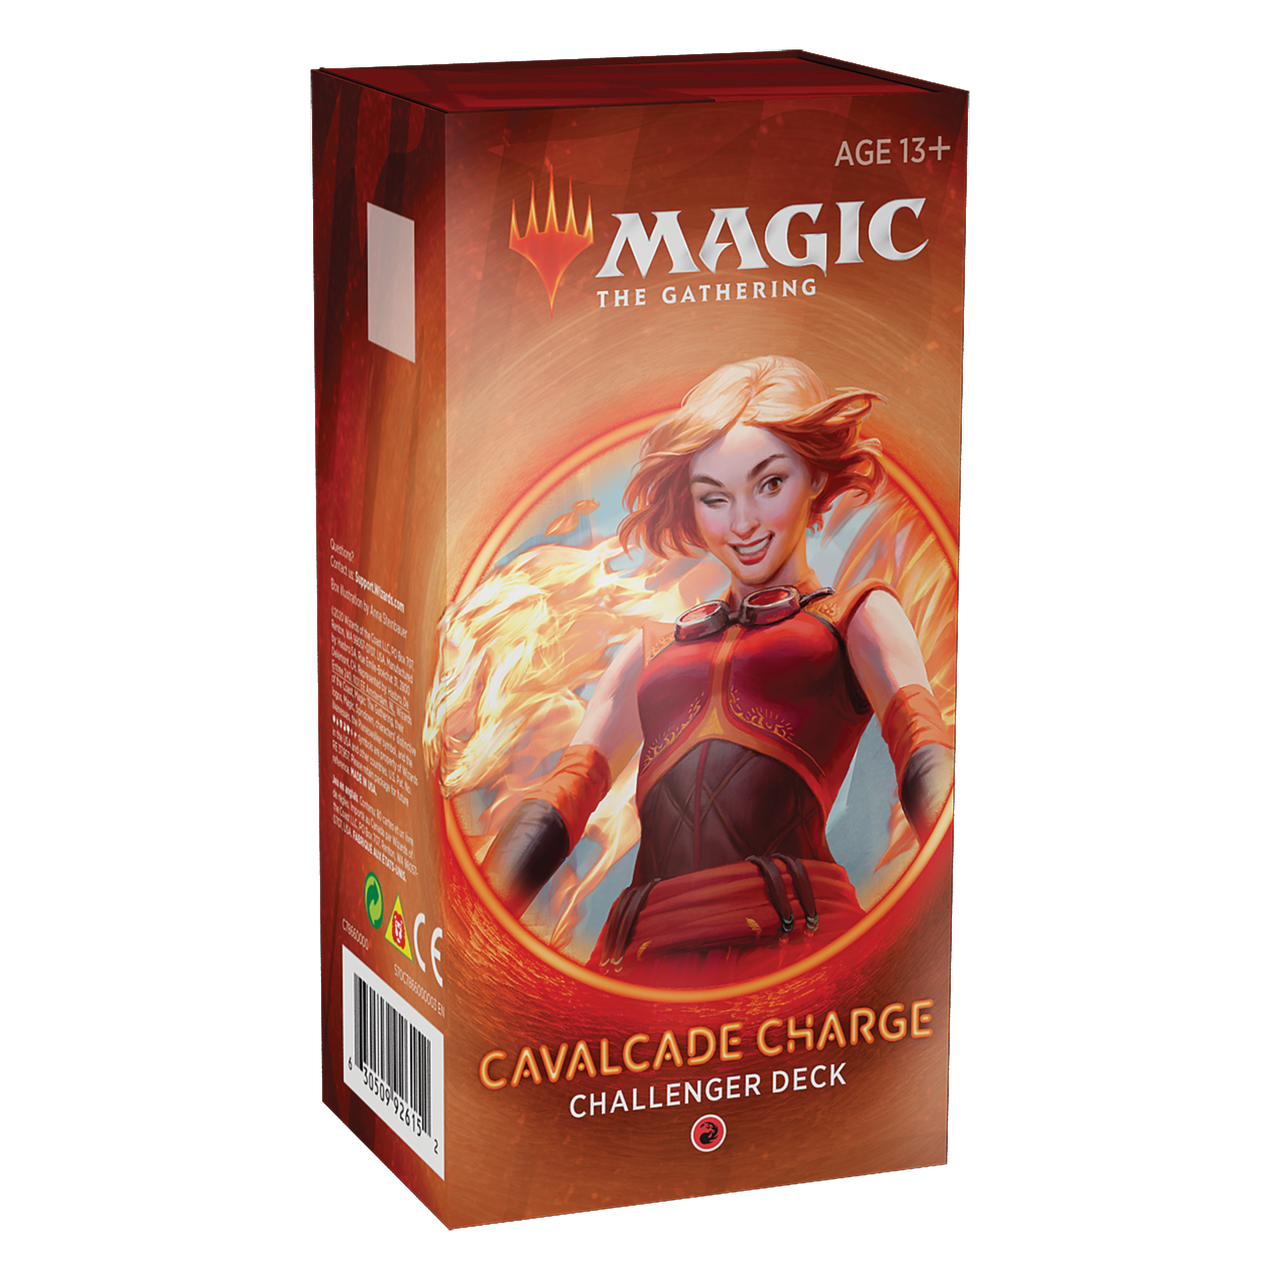 Magic The Gathering Challenger Deck - Cavalcade Charge